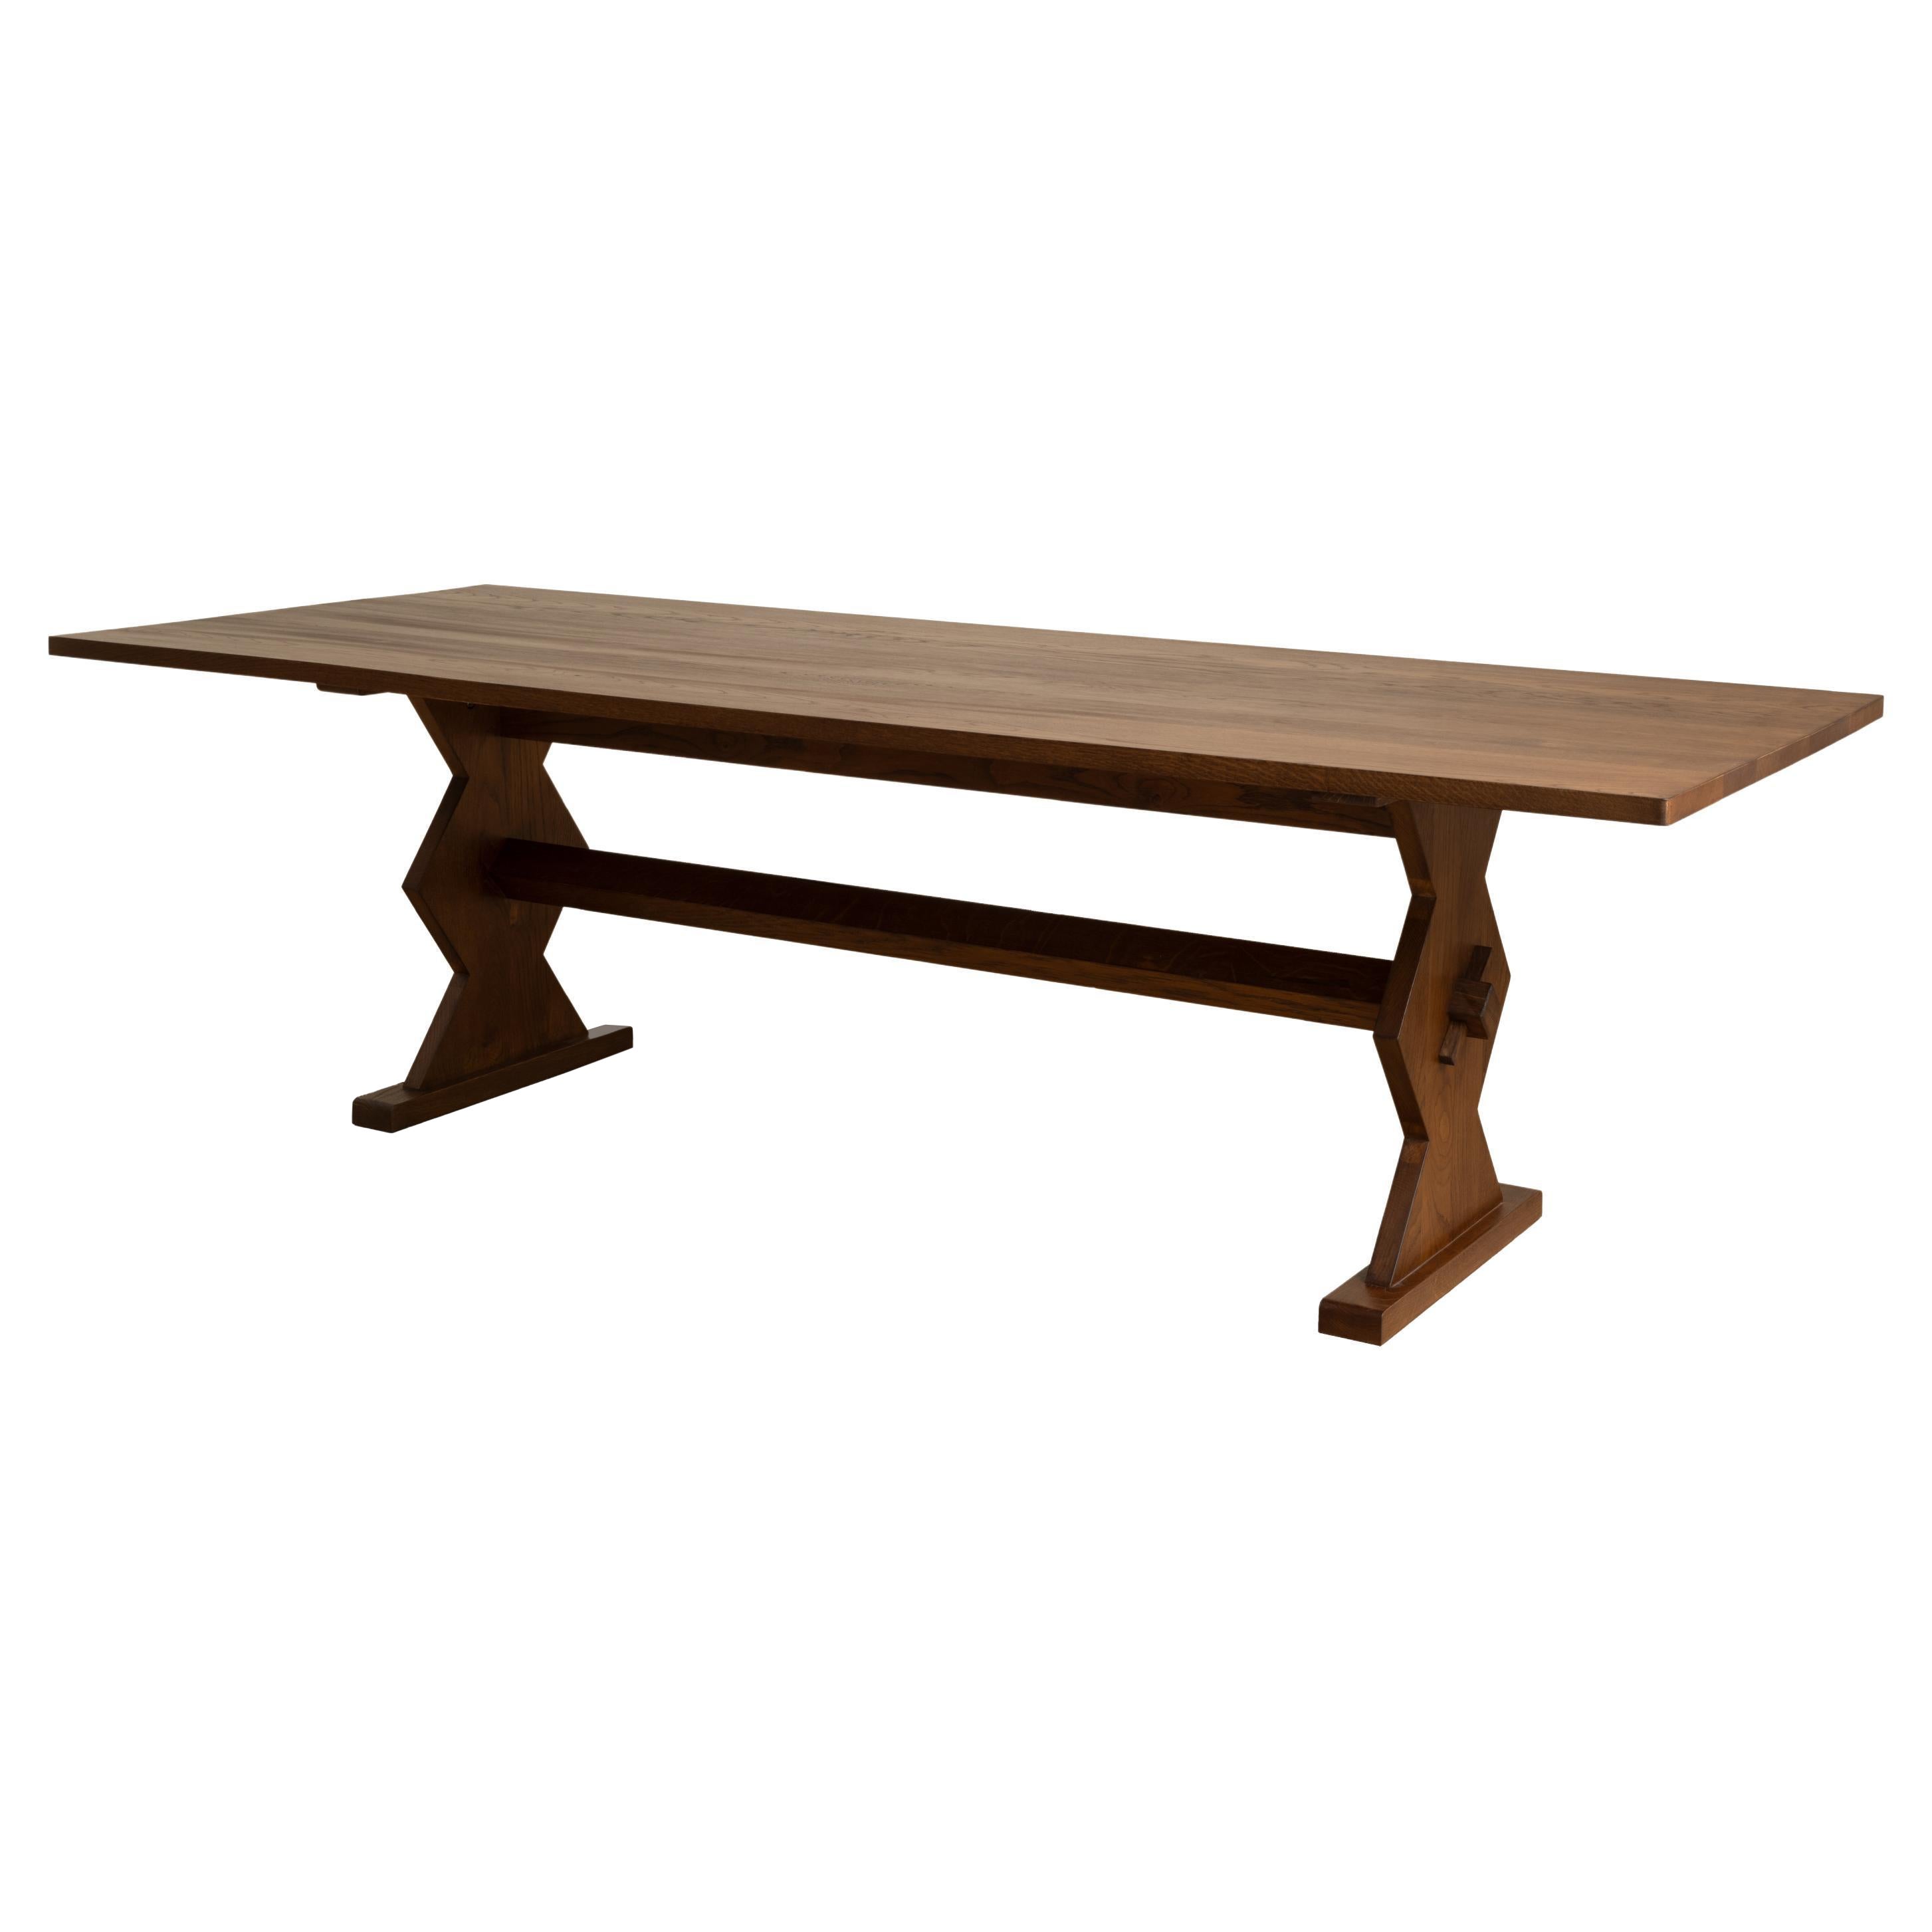 Rupert Bevan Marcel Dining Table - Small For Sale